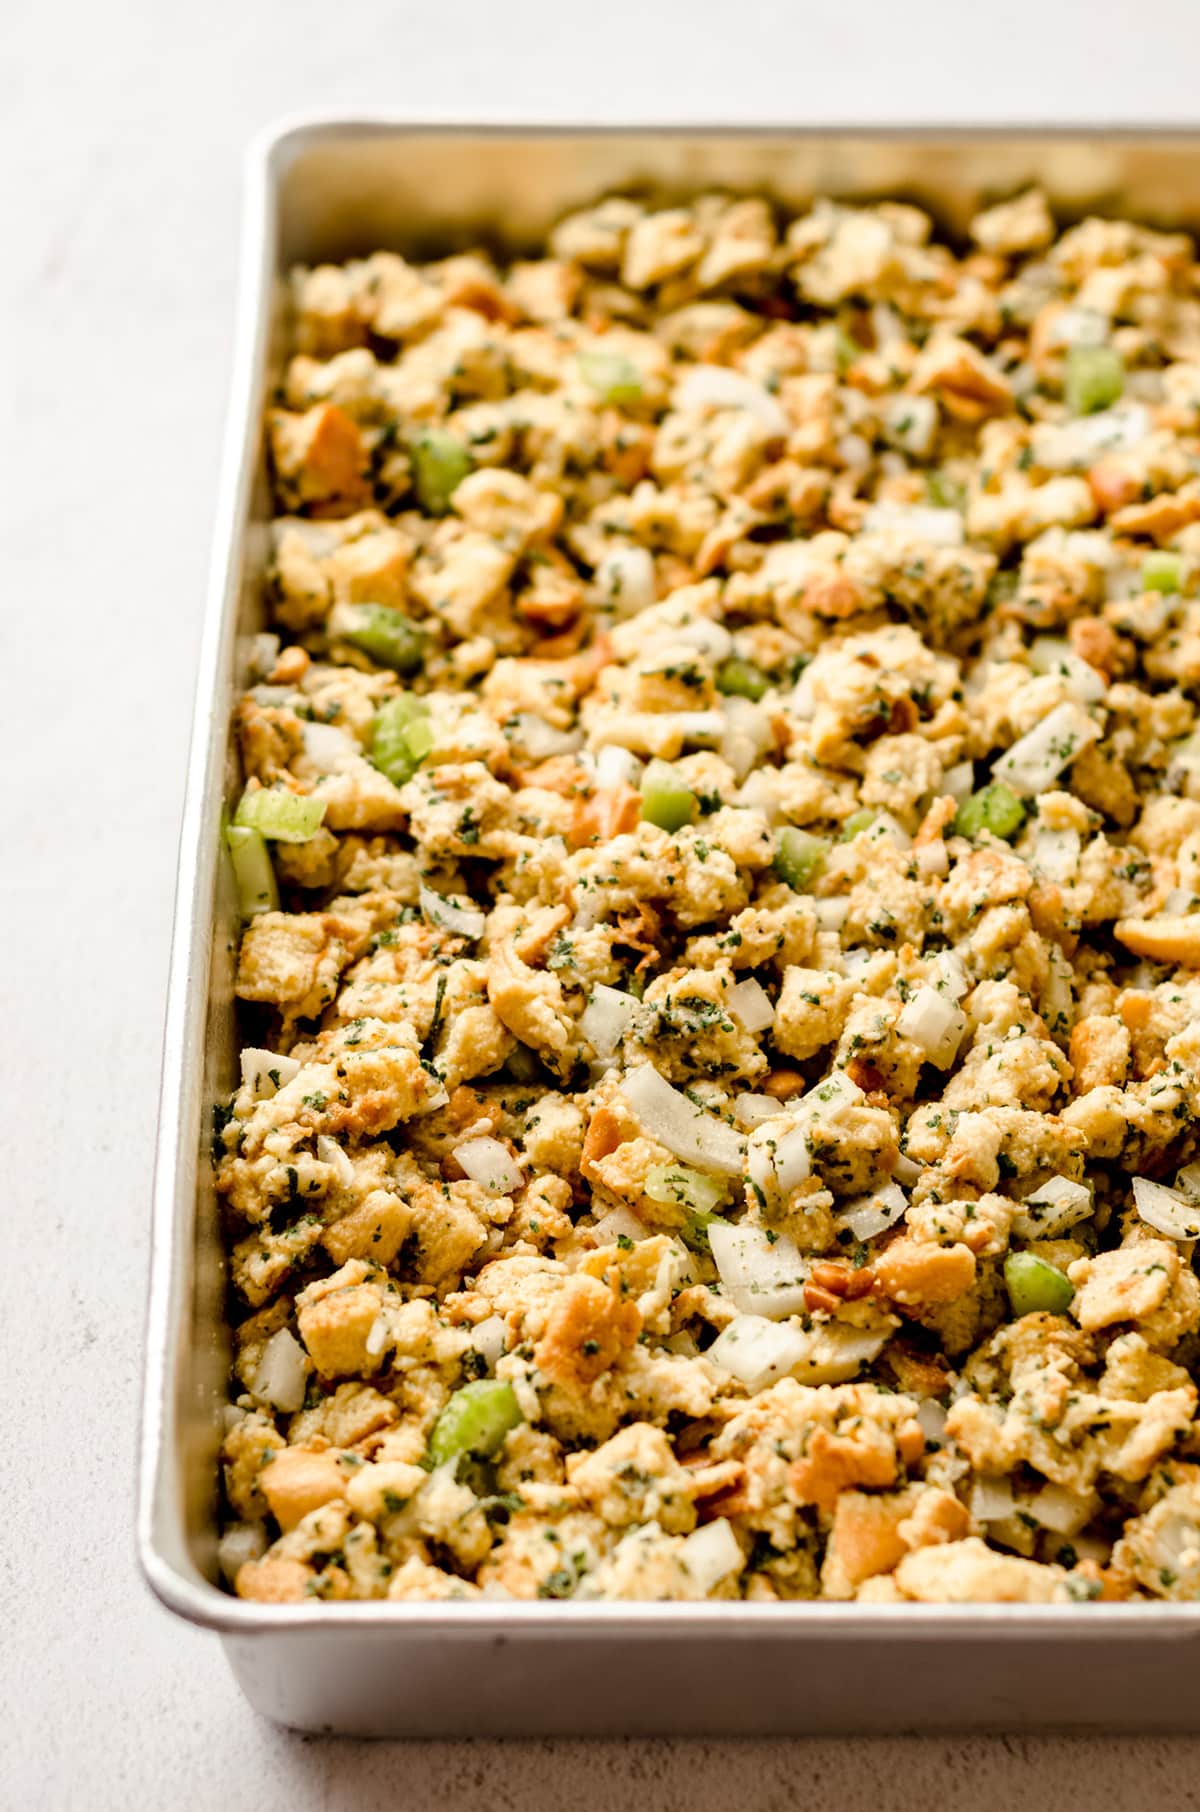 unbaked bread stuffing in a large dish